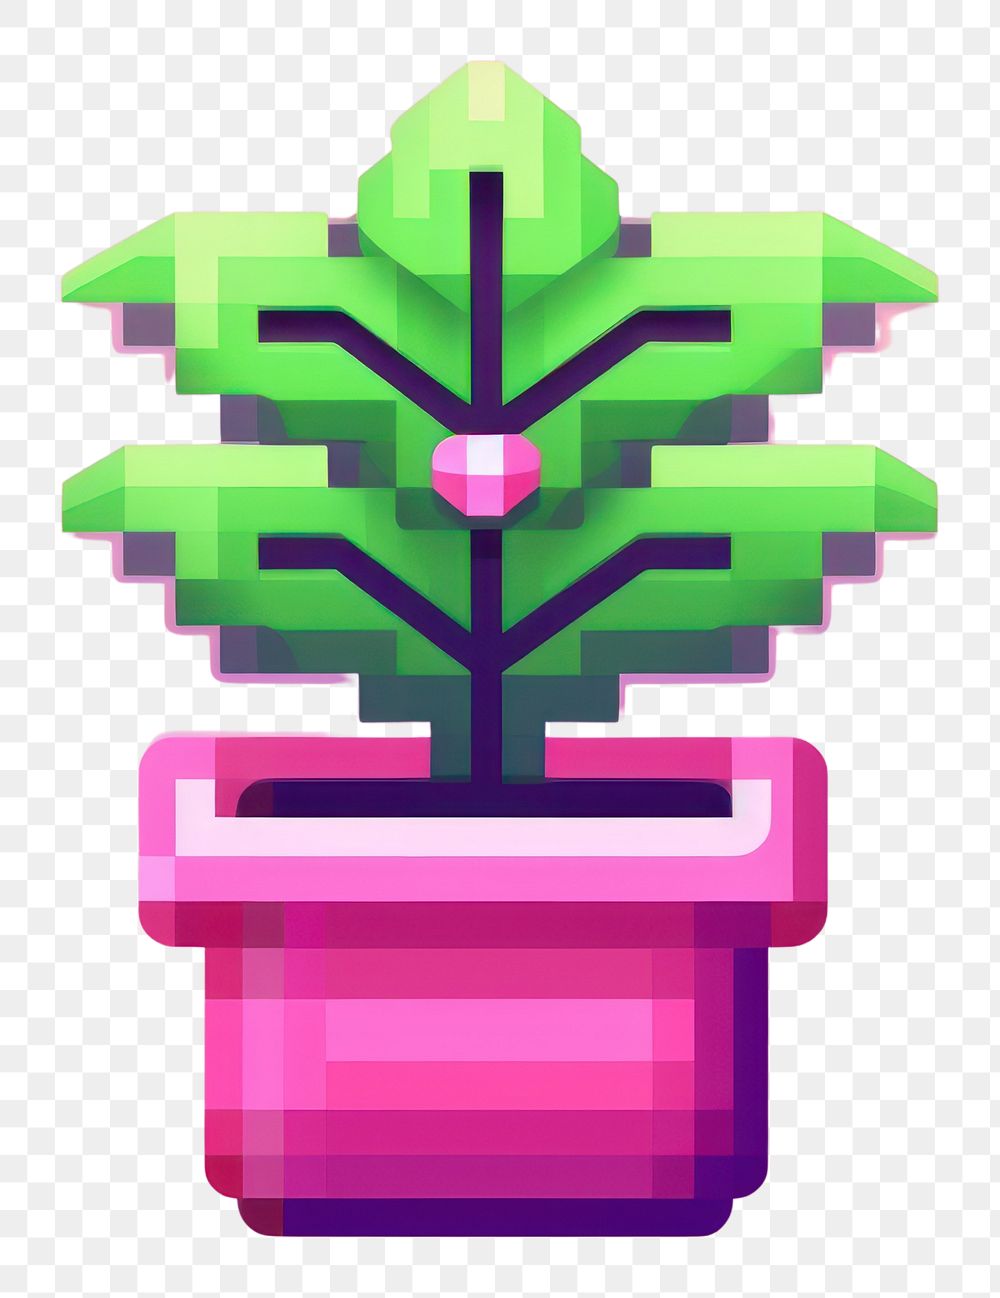 PNG Plants growth pixel graphics purple green.